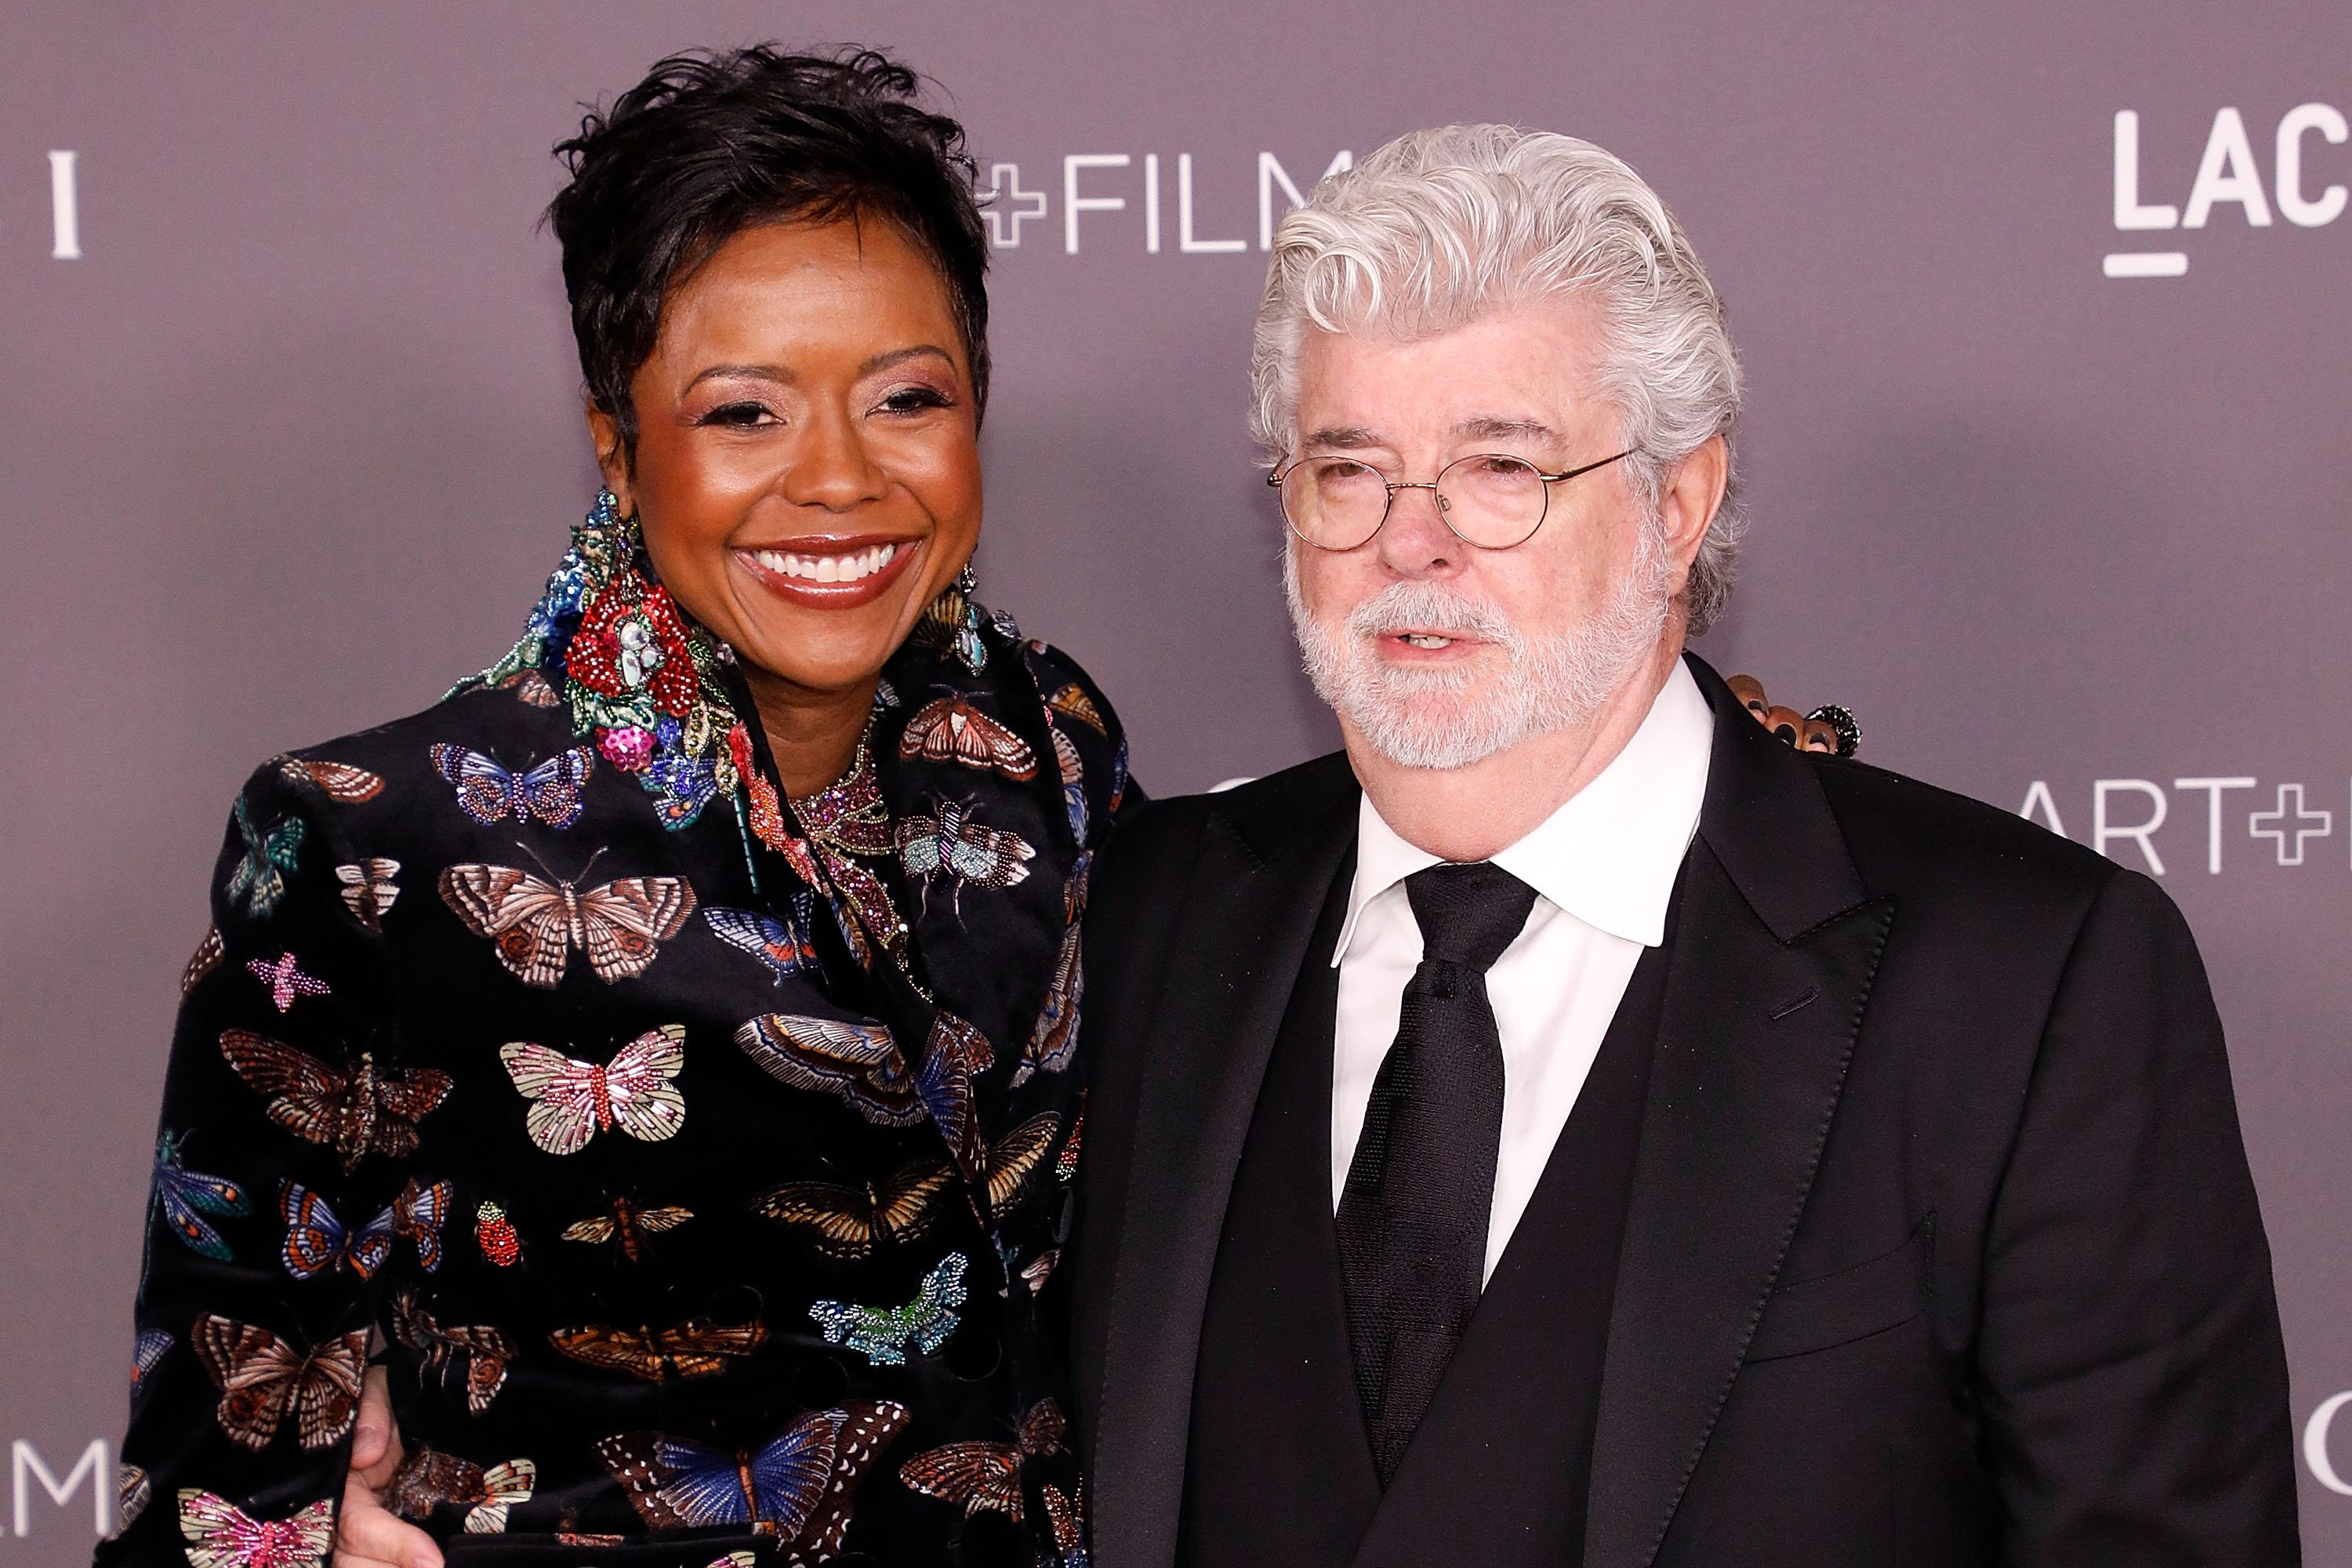 Mellody Hobson and George Lucas at the LACMA Art + Film Gala in Los Angeles on November 4, 2017 | Source: Getty Images